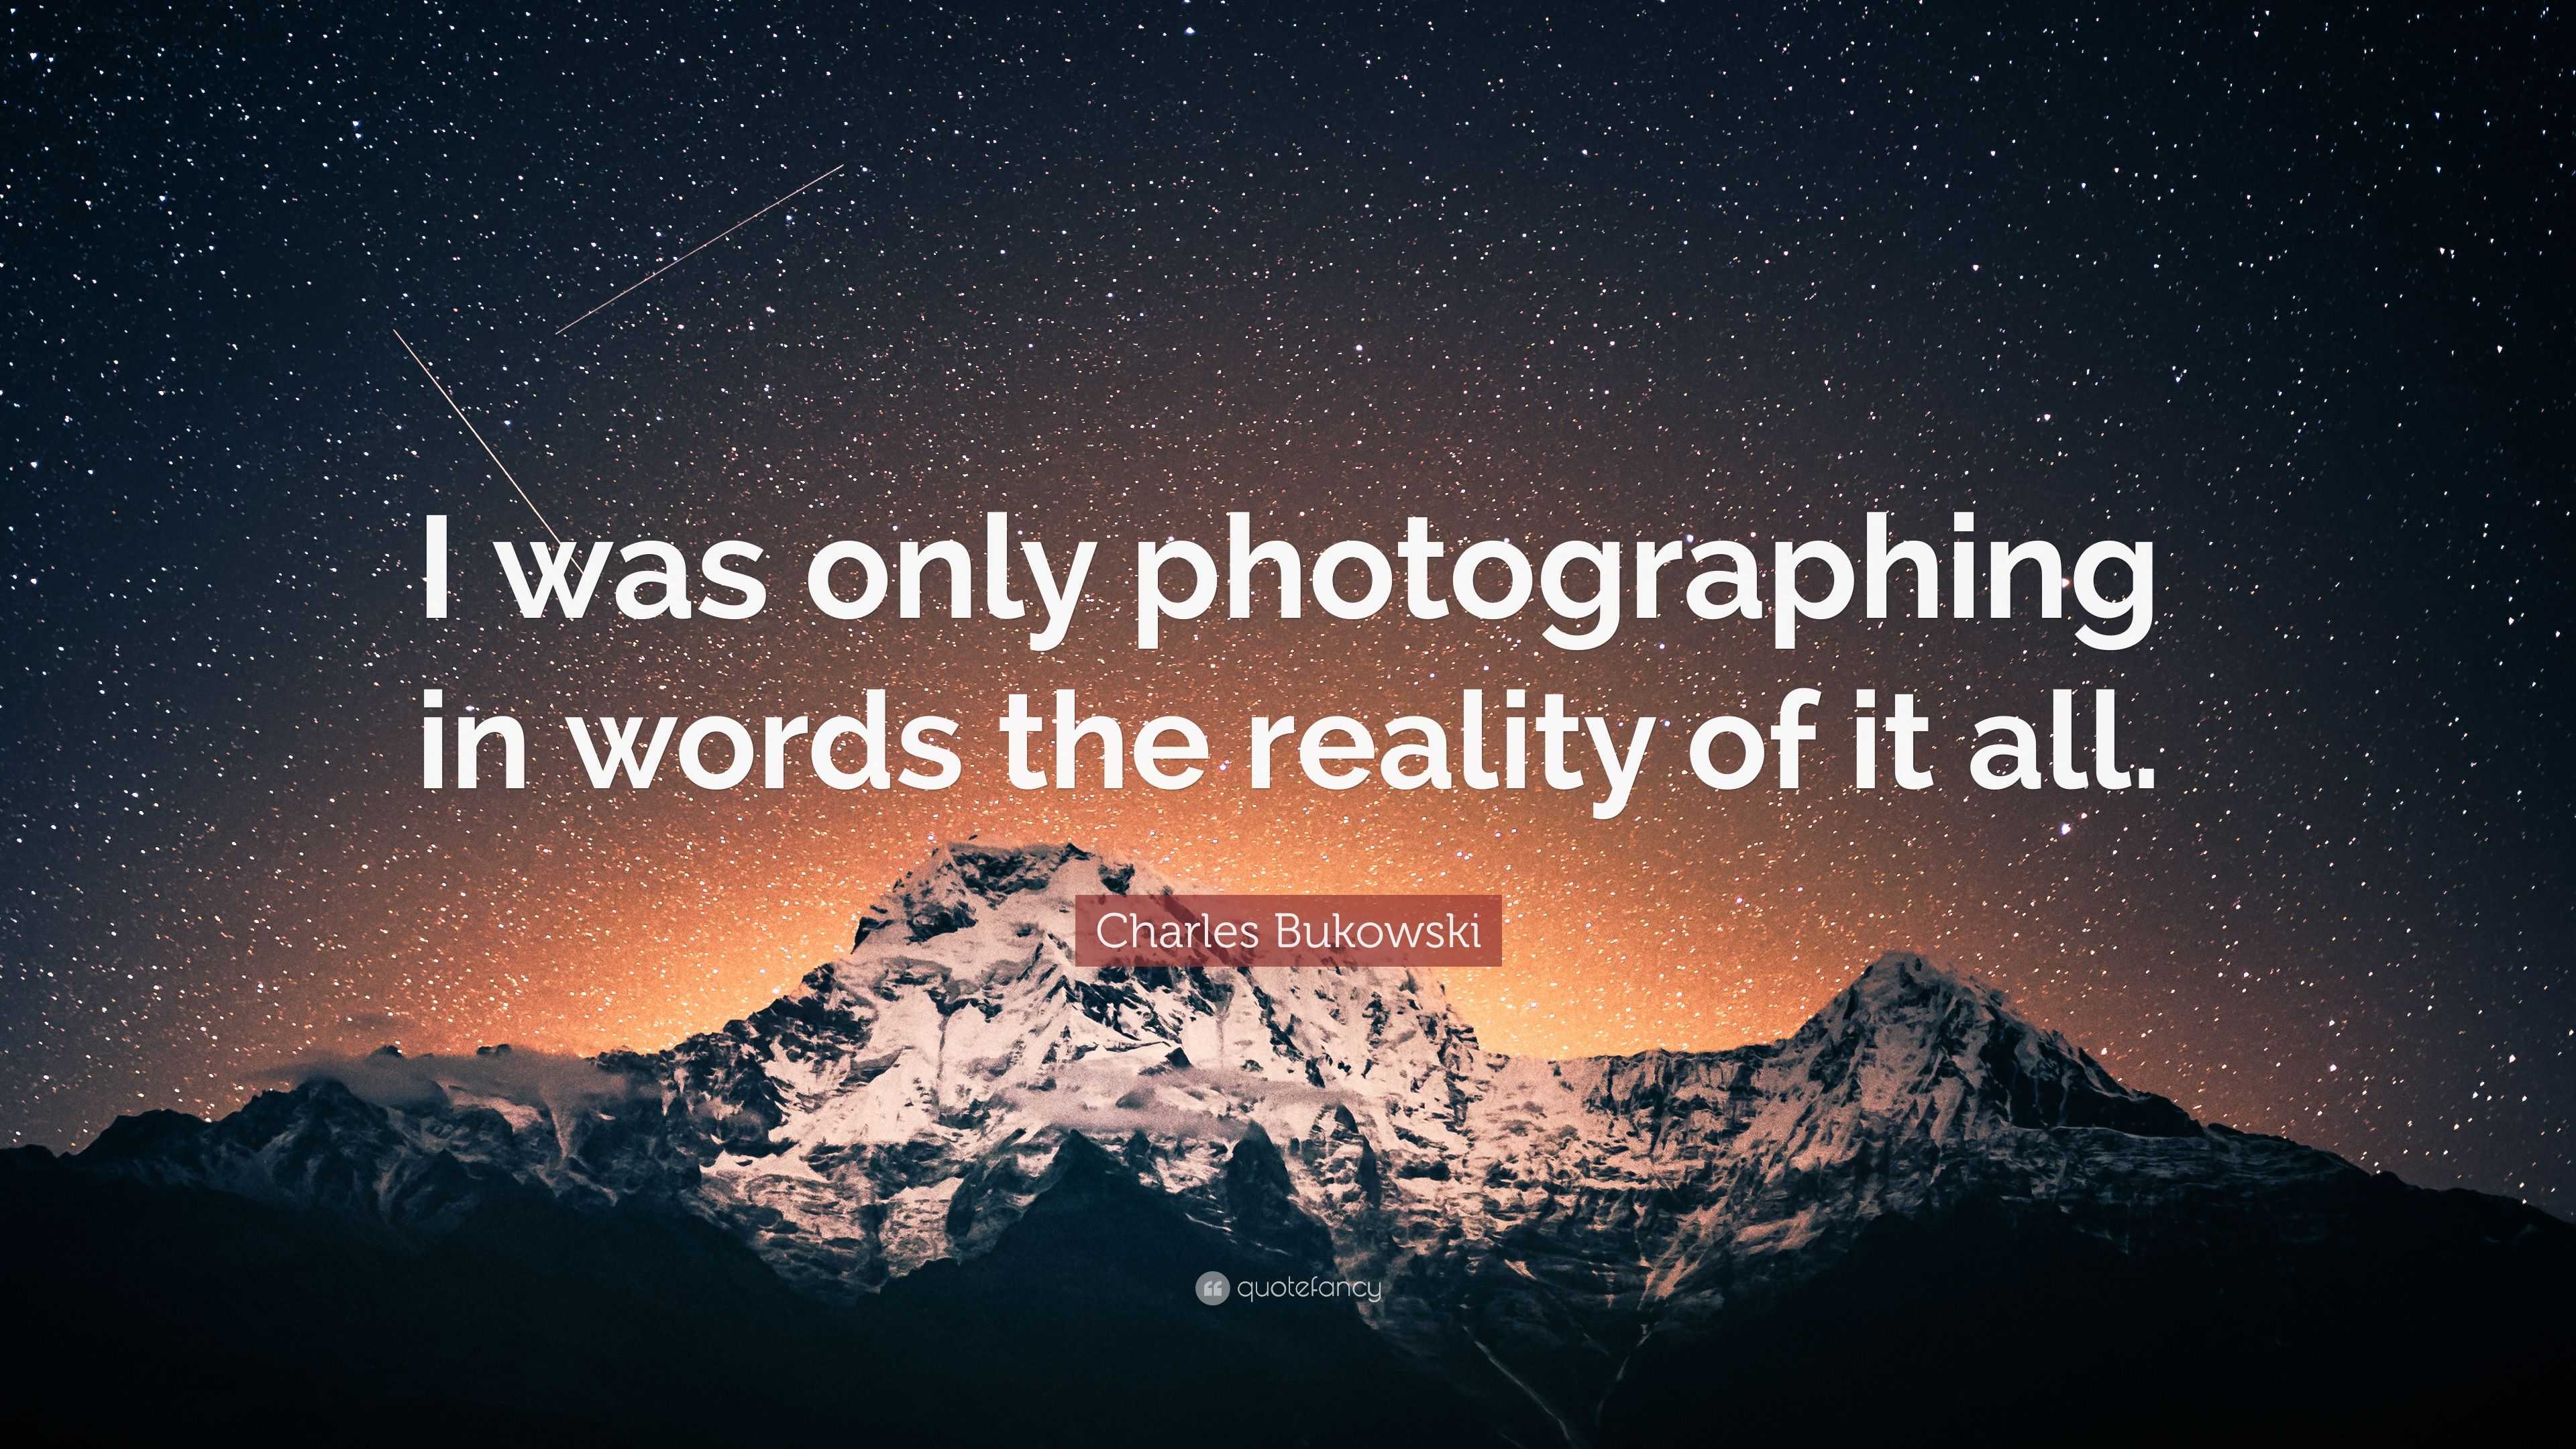 Charles Bukowski Quote: “I was only photographing in words the reality of  it all.”